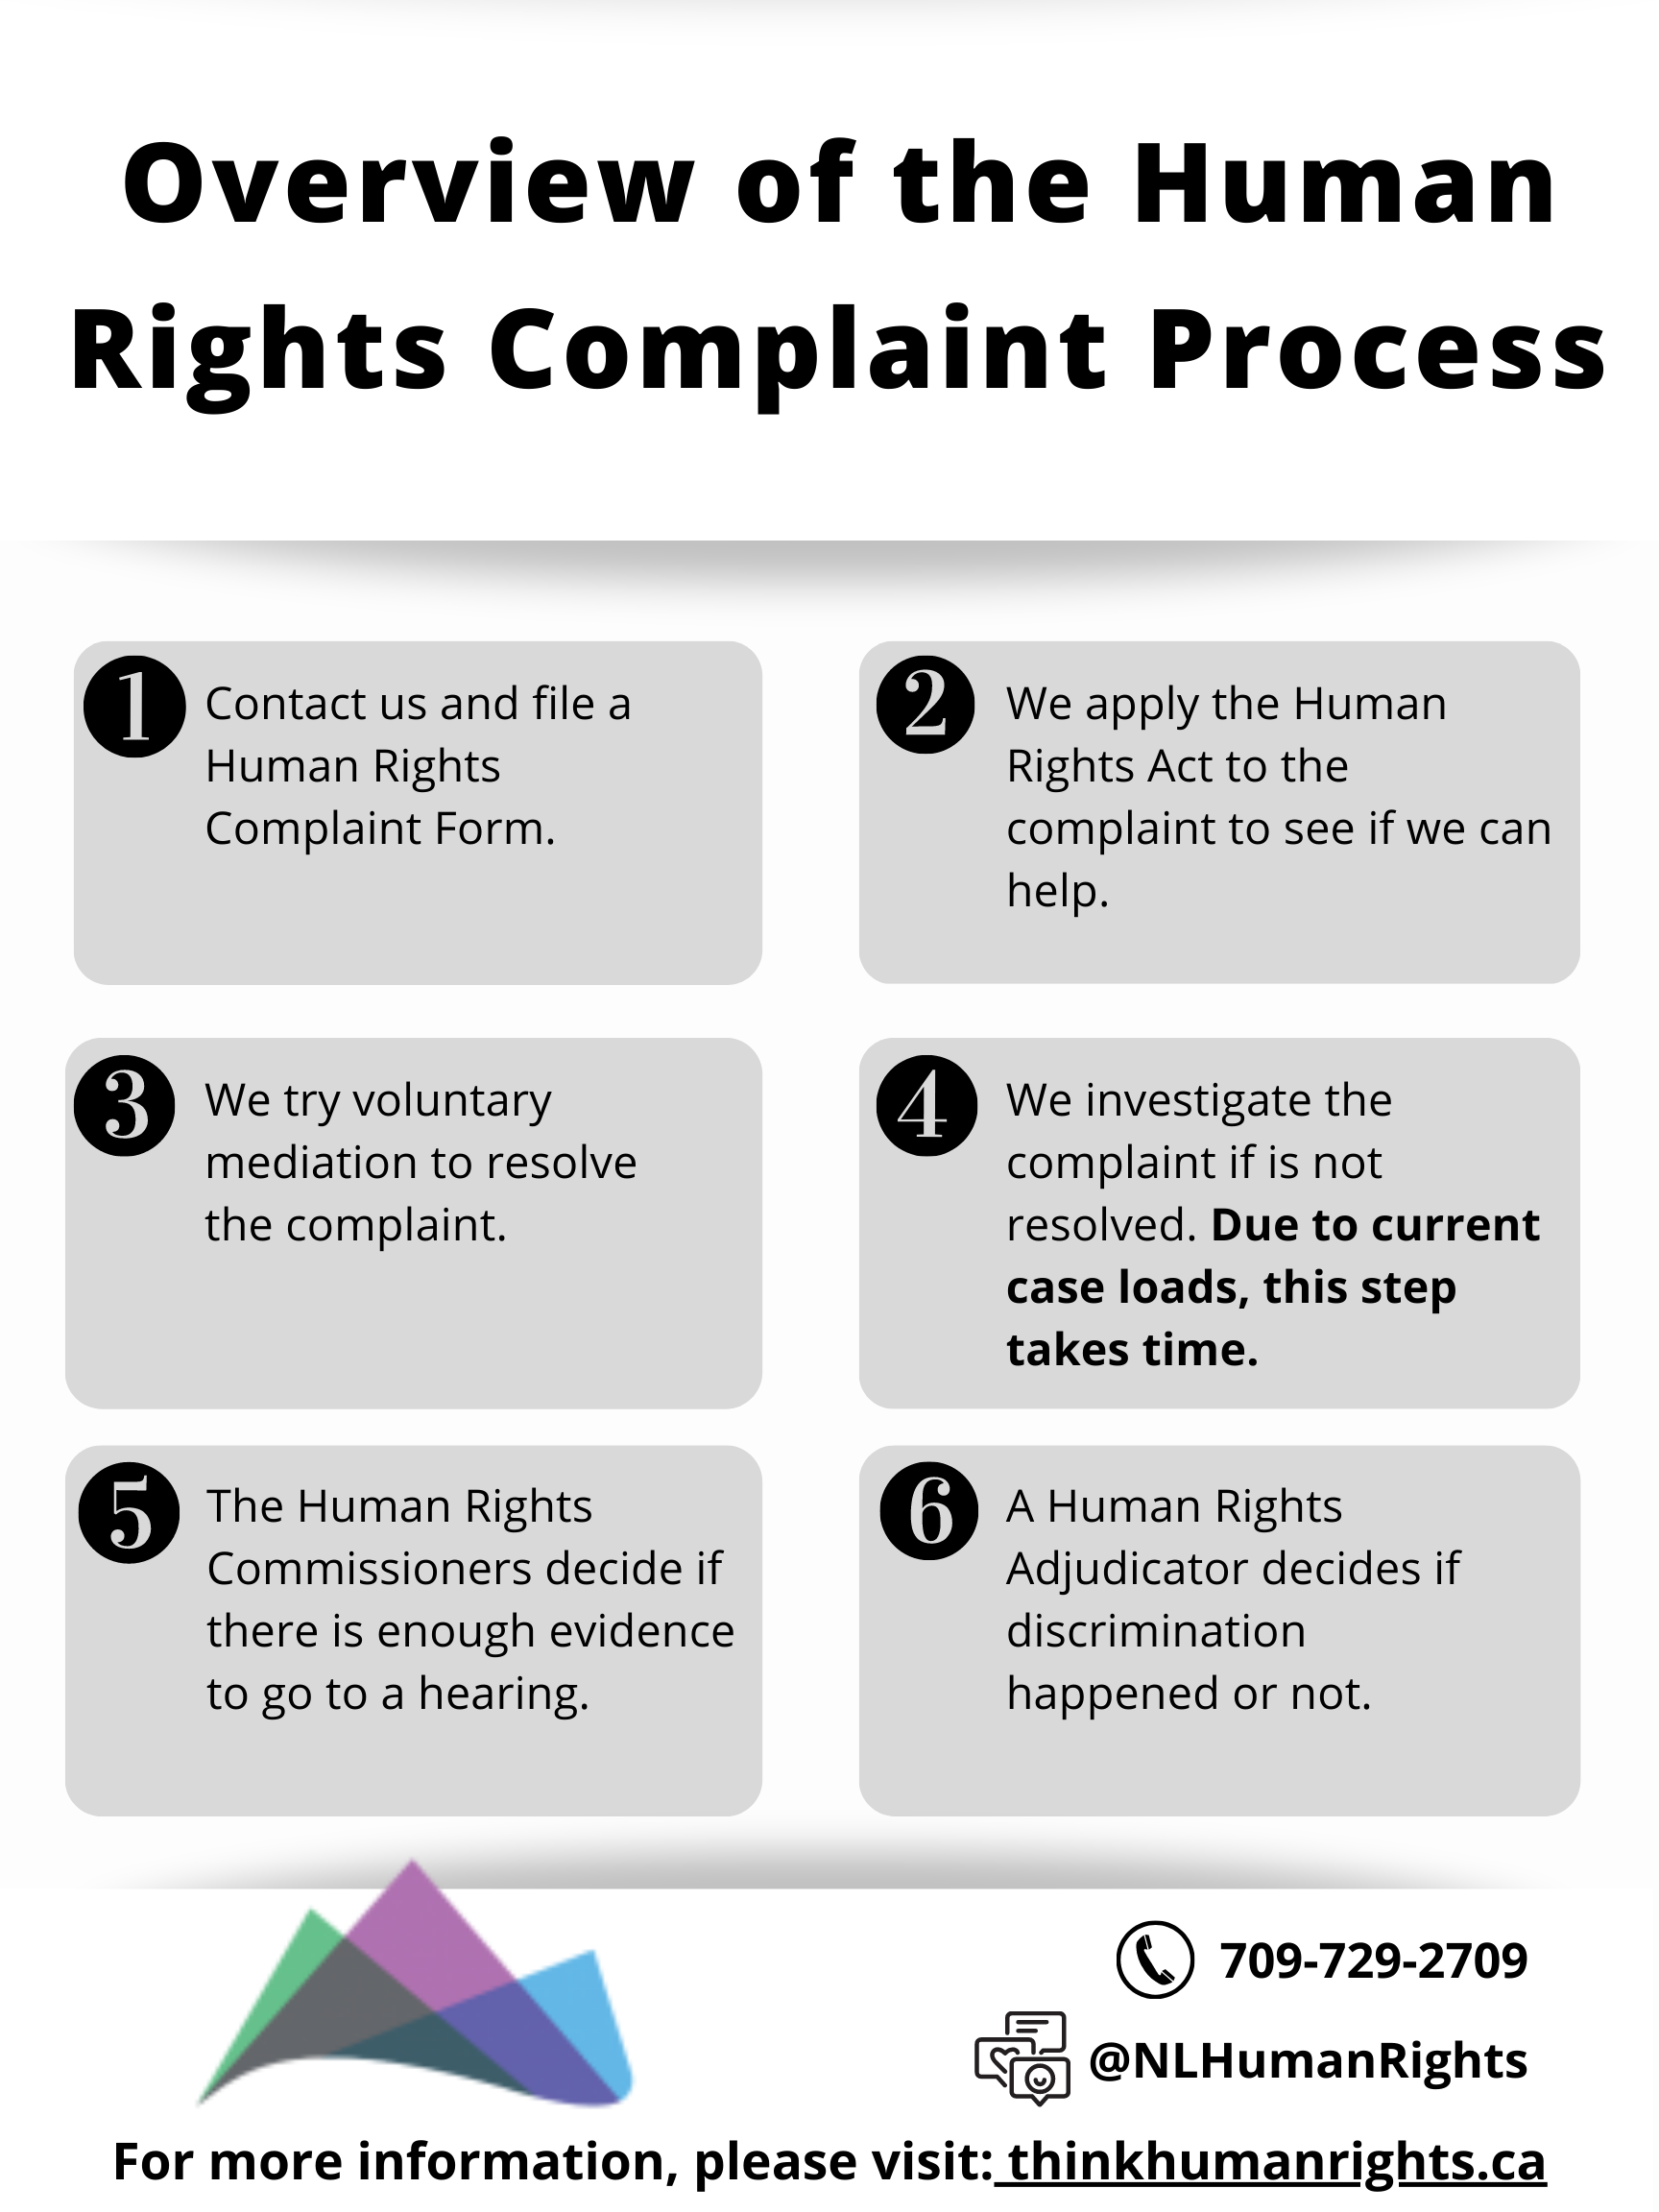 Overview of the Human Rights Complaint Process. First step communicates that people should contact us or file a human rights form after they have experienced unfair treatment. Second step demonstrates how we apply the Human Rights Act to complaints to see if we can help. In the third step, we try voluntary mediation to resolve the complaint. If the complaint is not resolved, we move on to step 4 which is an investigation. This step takes time. Step five communicates the Human Rights Commissioners role in the decision-making process. The sixth and final step outlines how an Adjudicator decides if discrimination happened or not. 